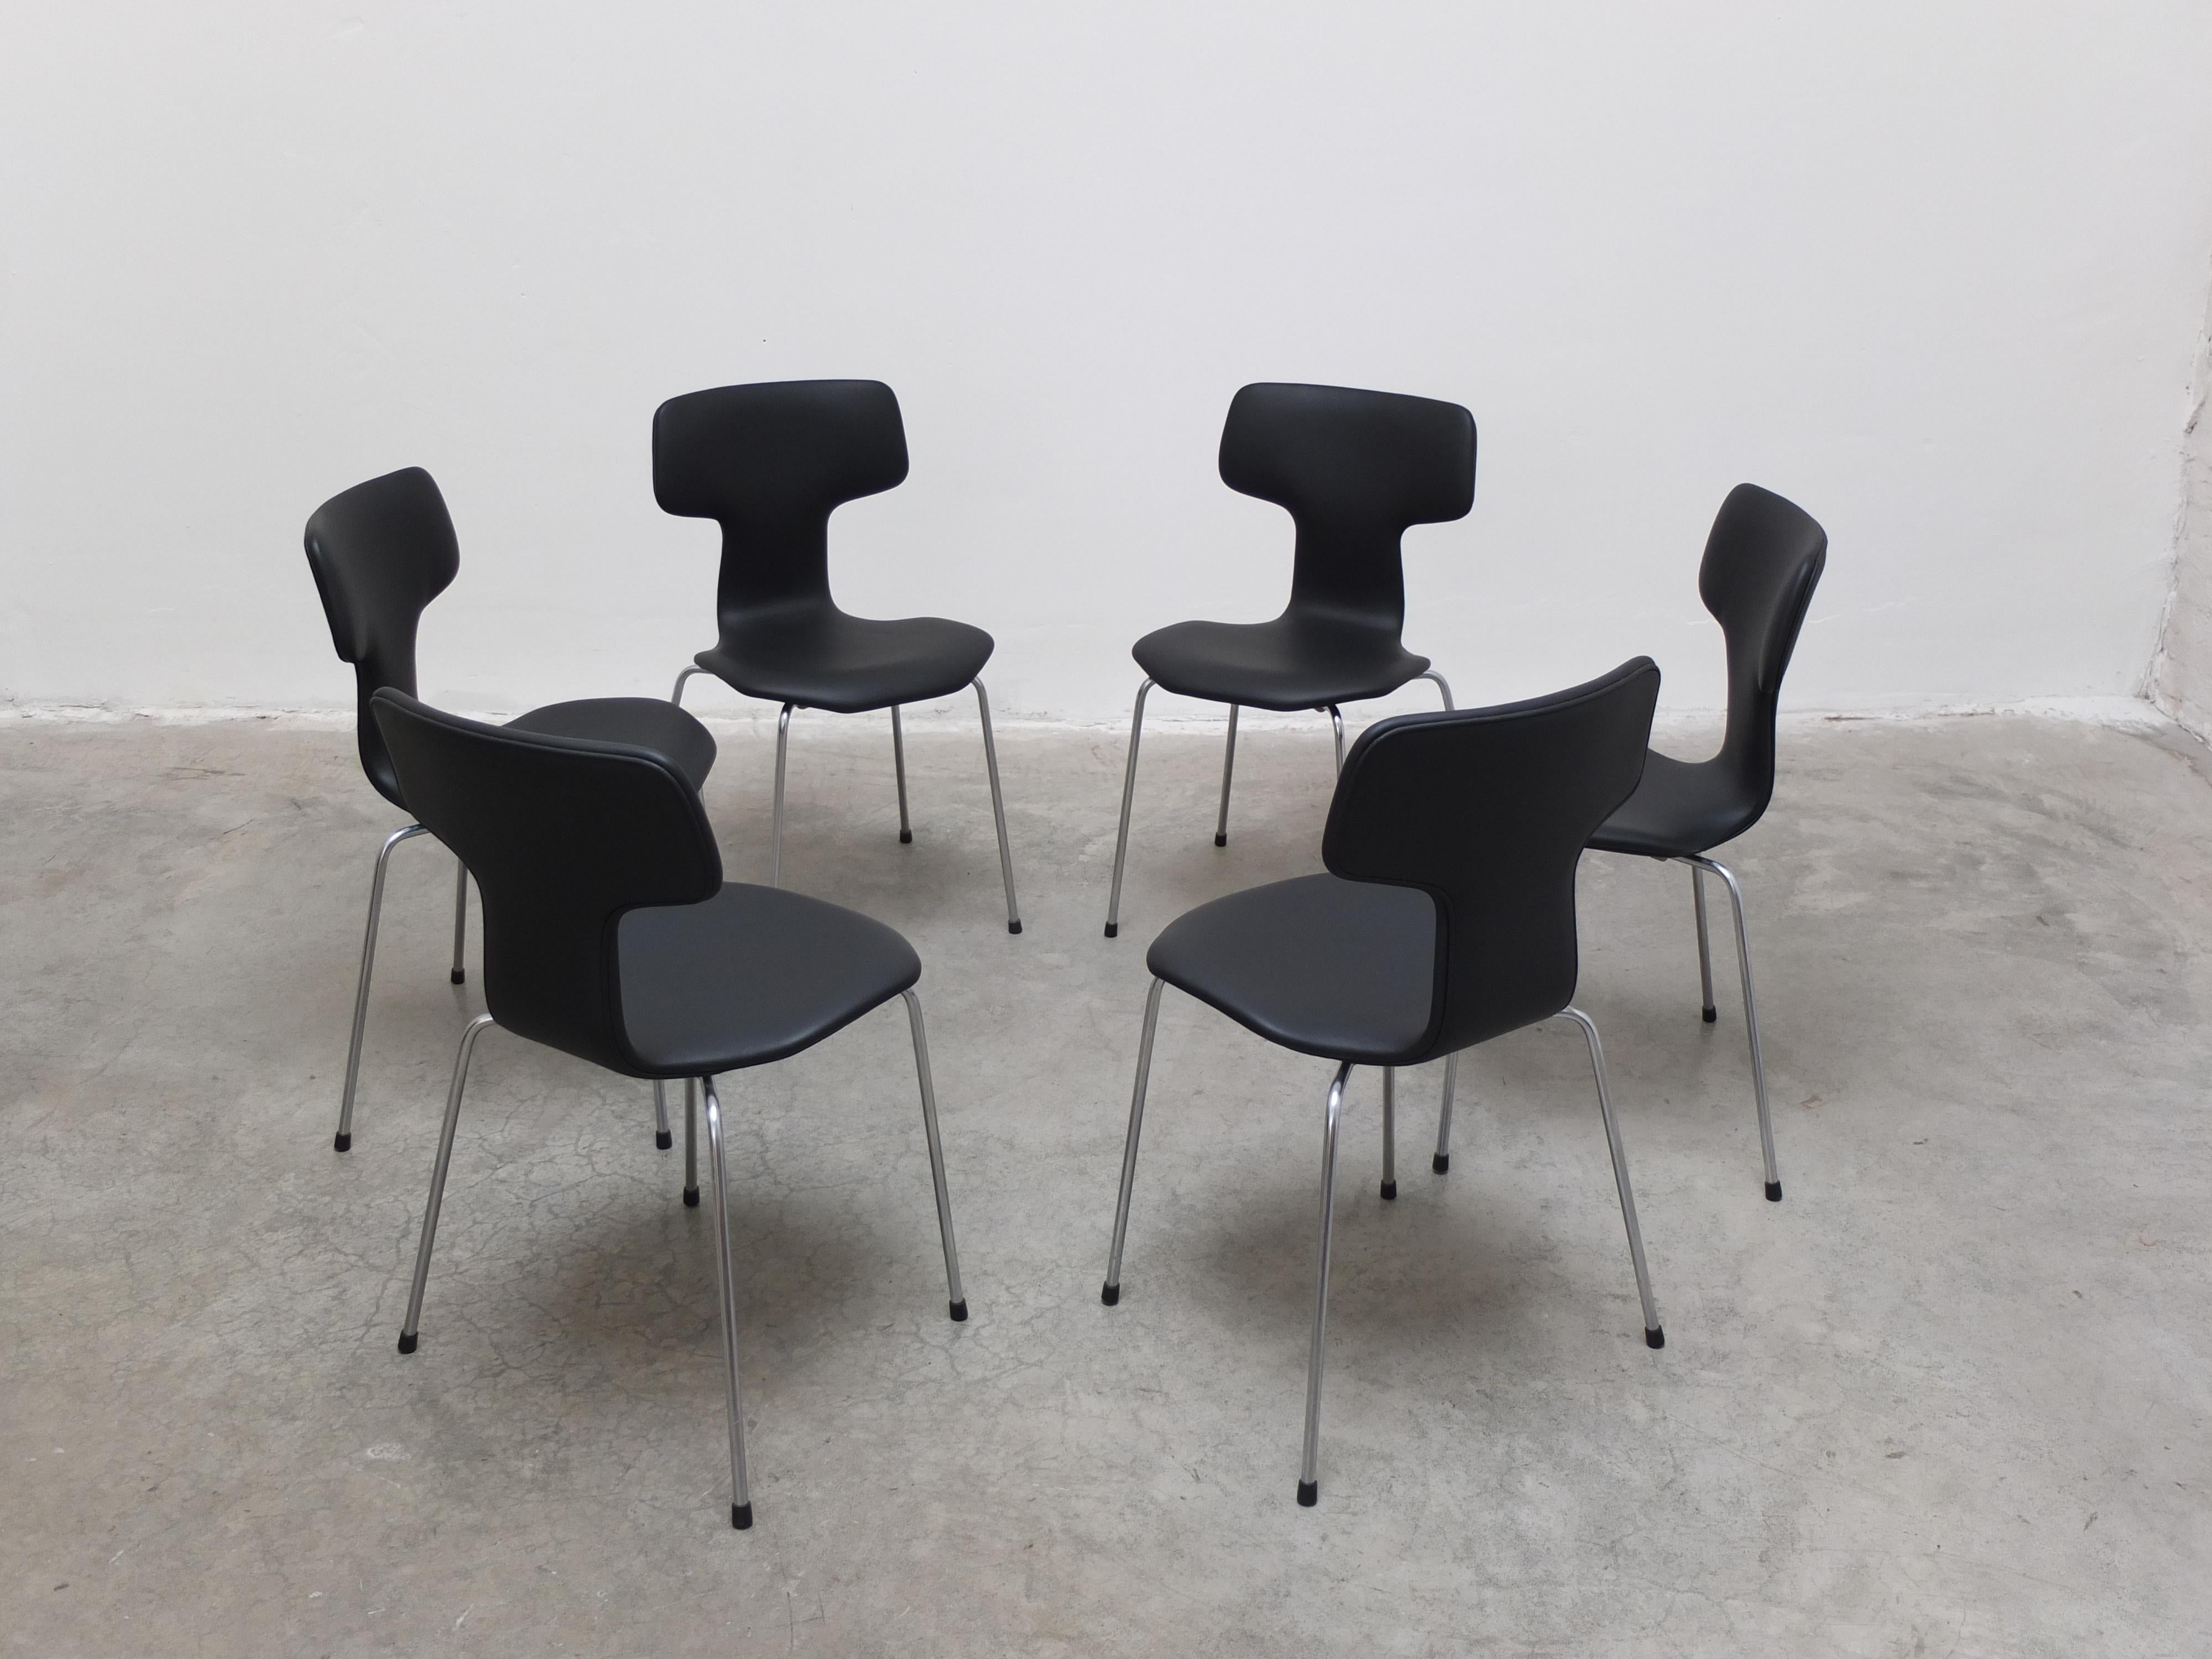 Exceptional set of 6 ‘Hammer’ chairs in genuine black leather designed by Arne Jacobsen in 1955. These are early models produced by Fritz Hansen in 1967 which have been professionally reupholstered with the highest quality Sørensen leather in